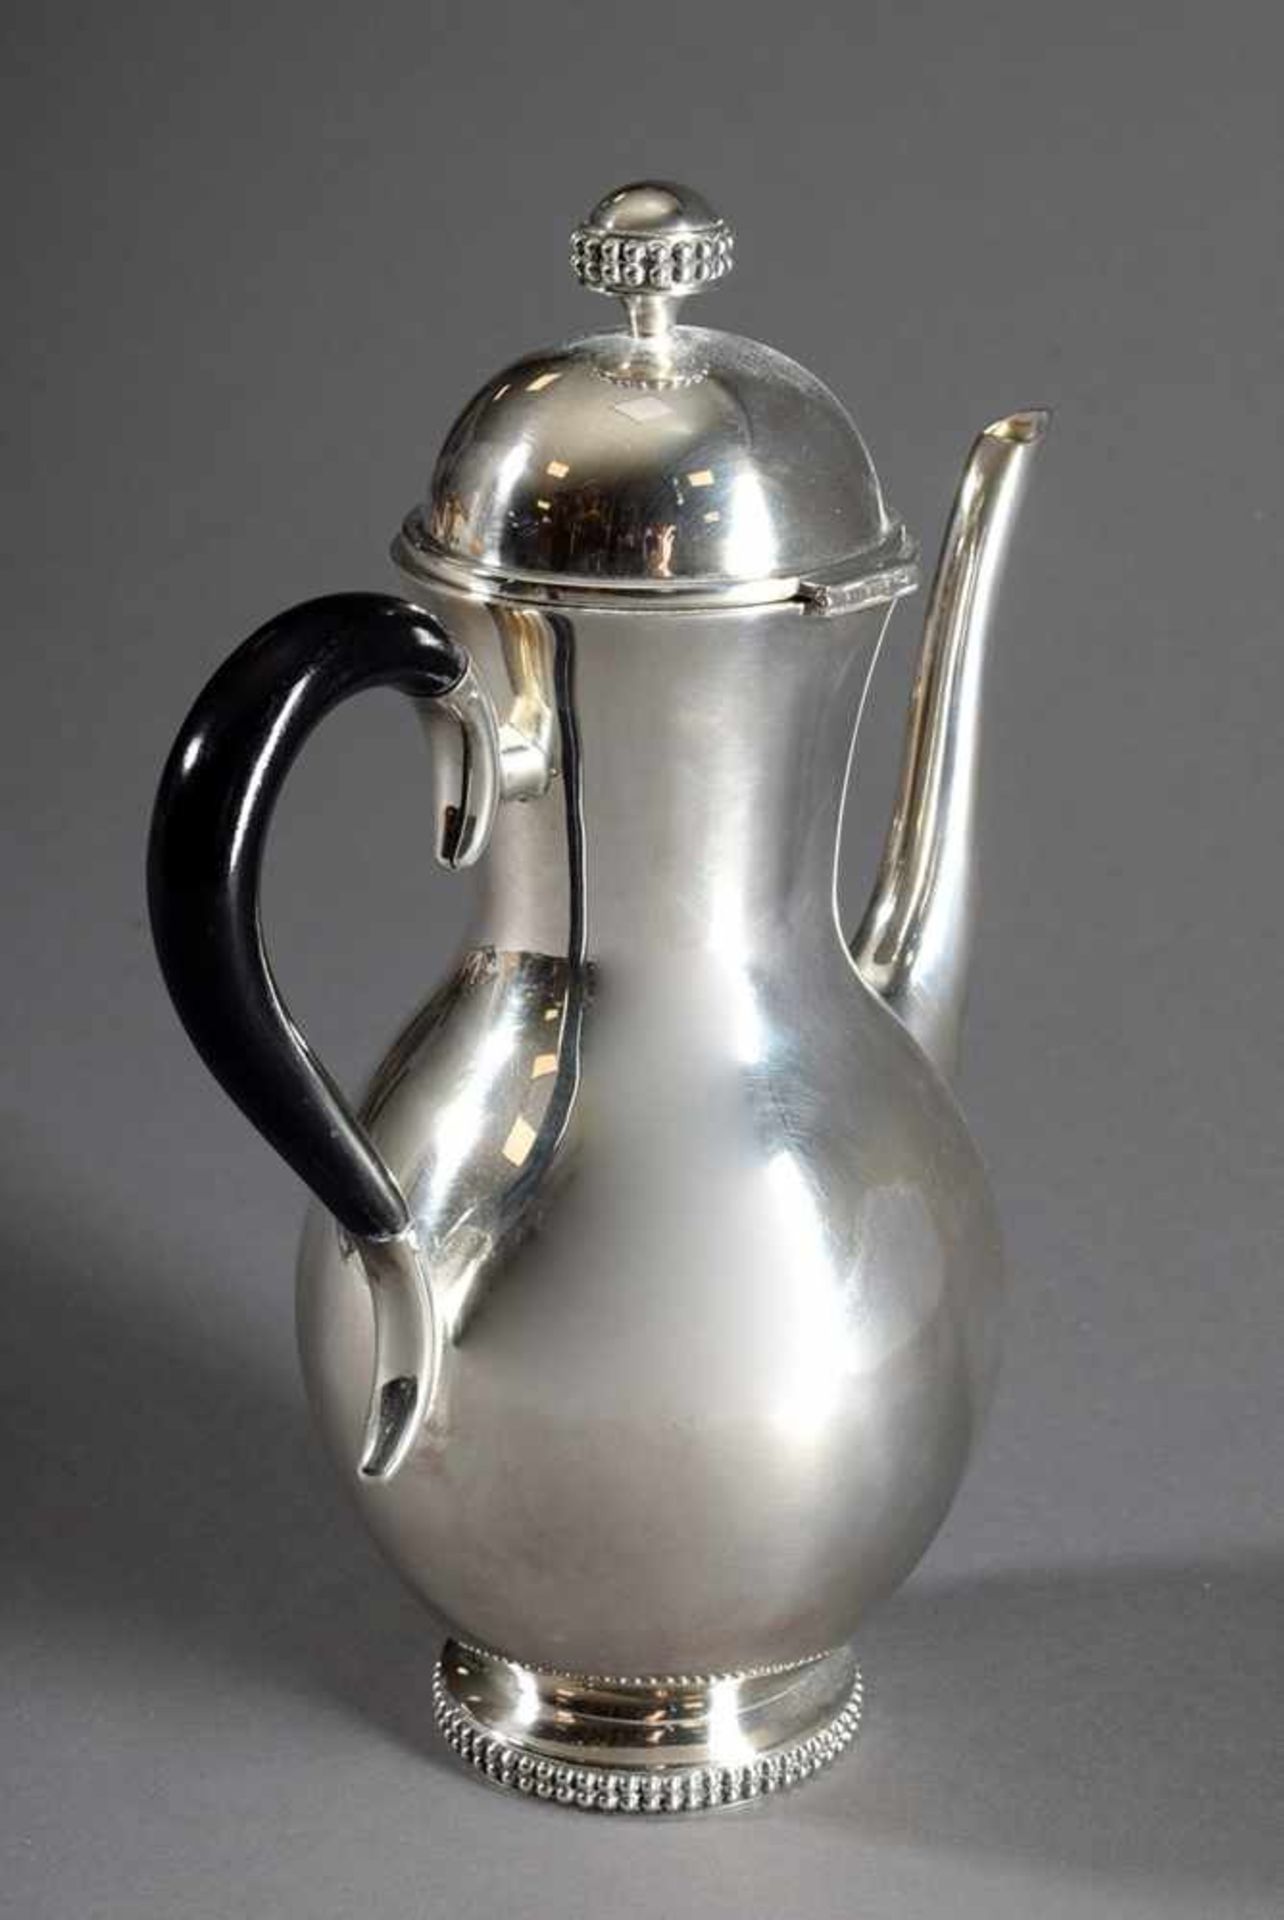 Midcentury mocha pot with double beaded rim, Wilkens, silver 835, 440g, h. 23cm - Image 2 of 4